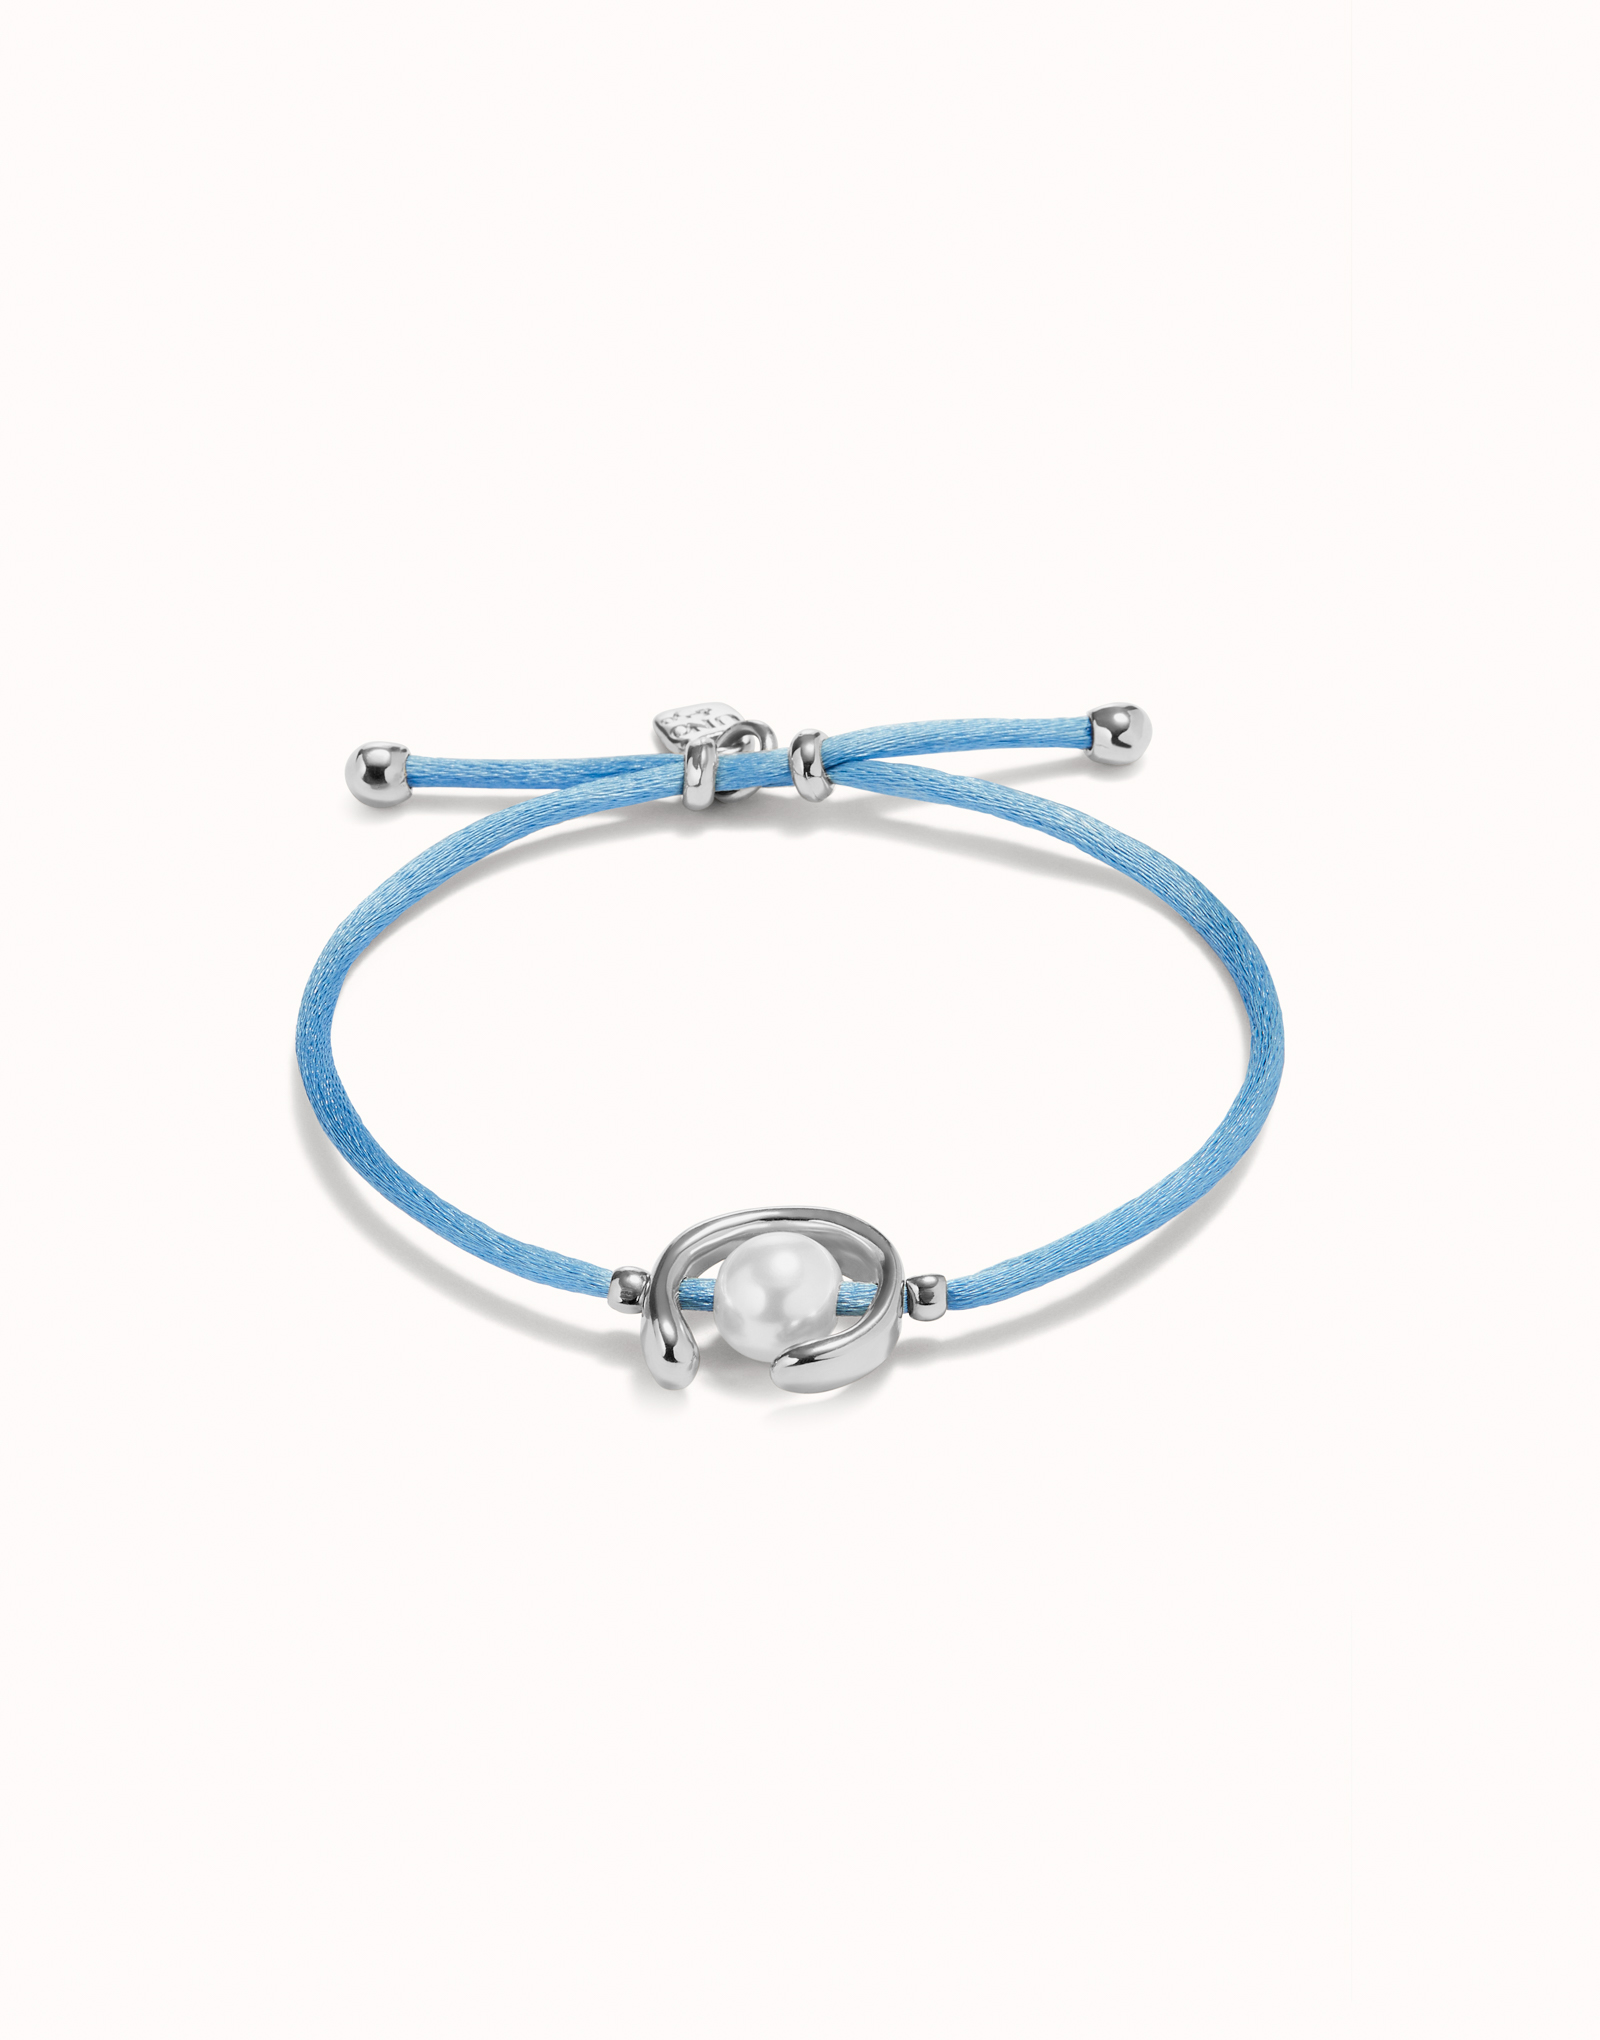 Bracciale in filo blu con perla shell assortimento placcato argento Sterling., Argent, large image number null